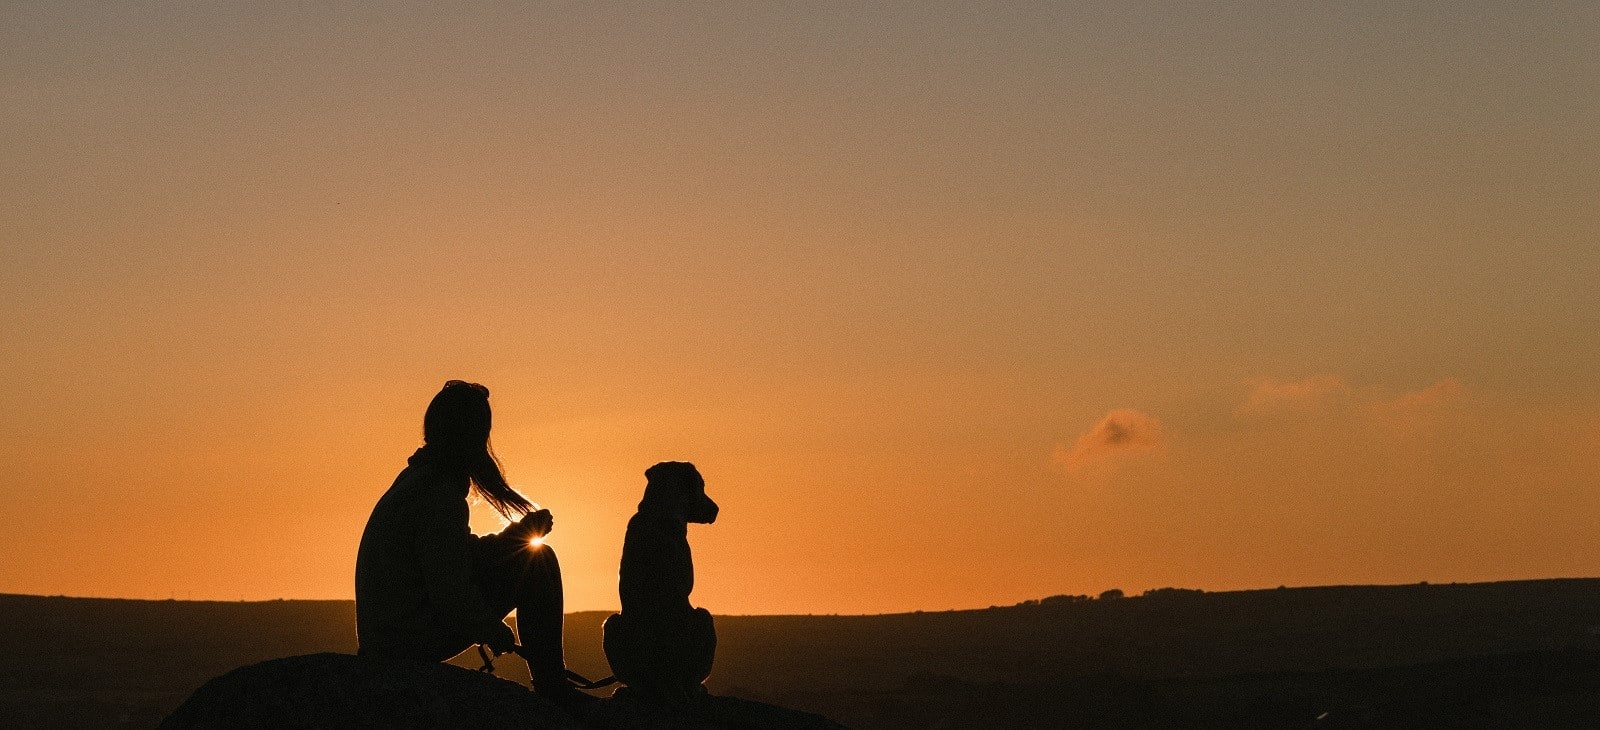 A dog and it's owner watching the sun set.